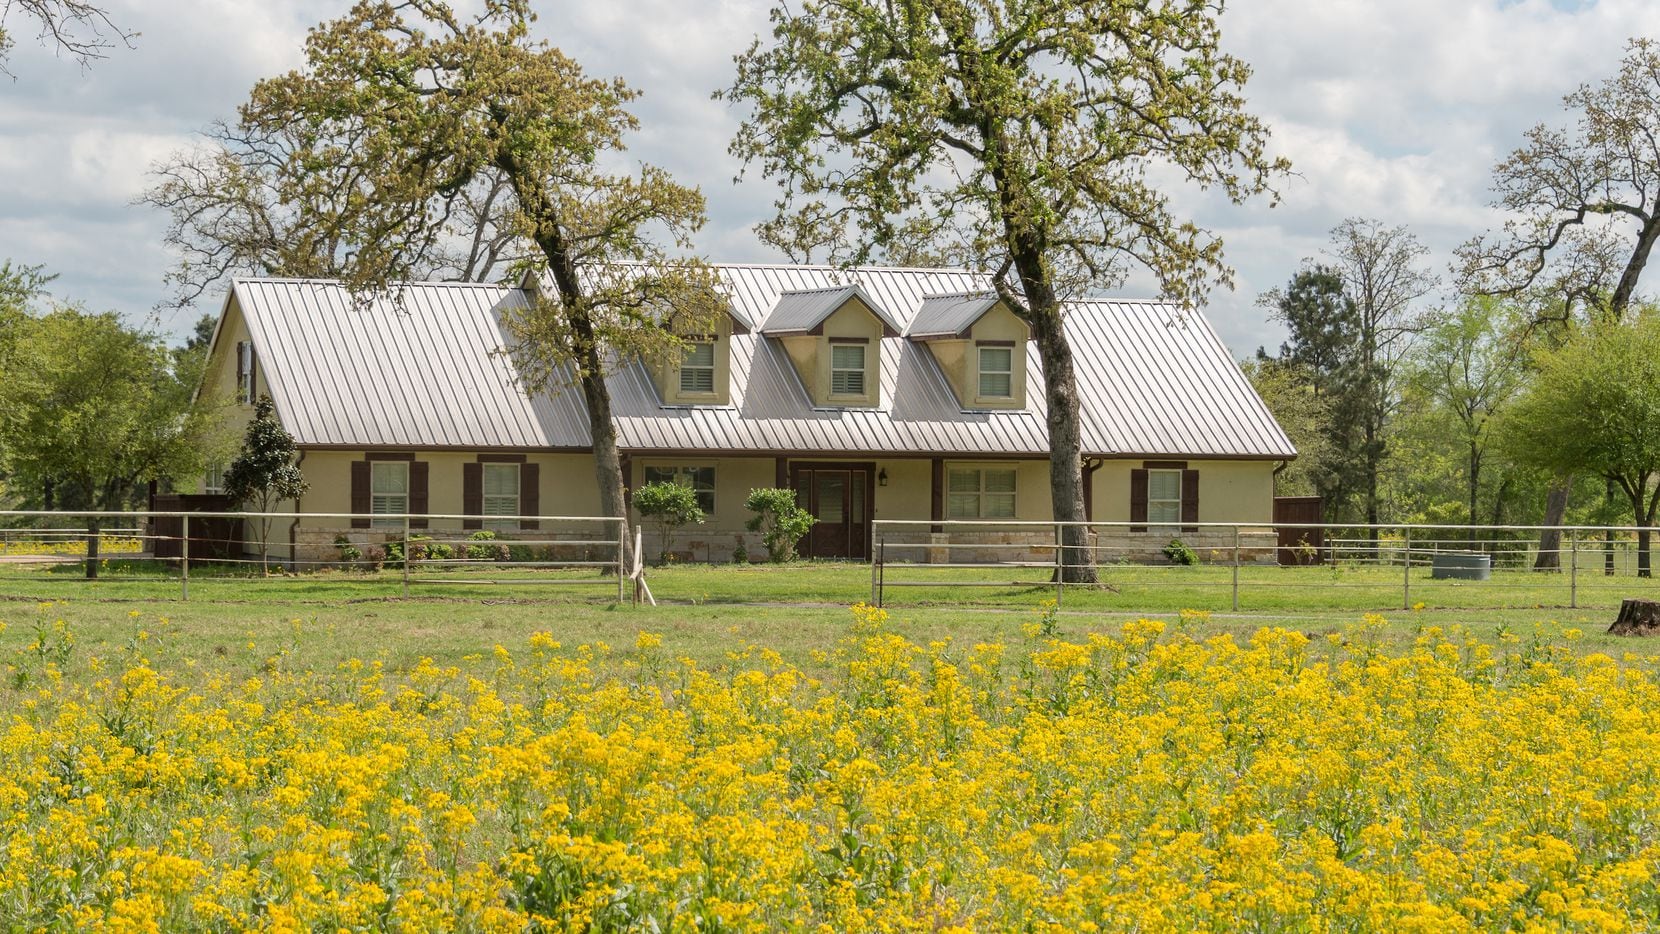 ranch texas central barns champion icon storied call last bunk cabins includes dallas global